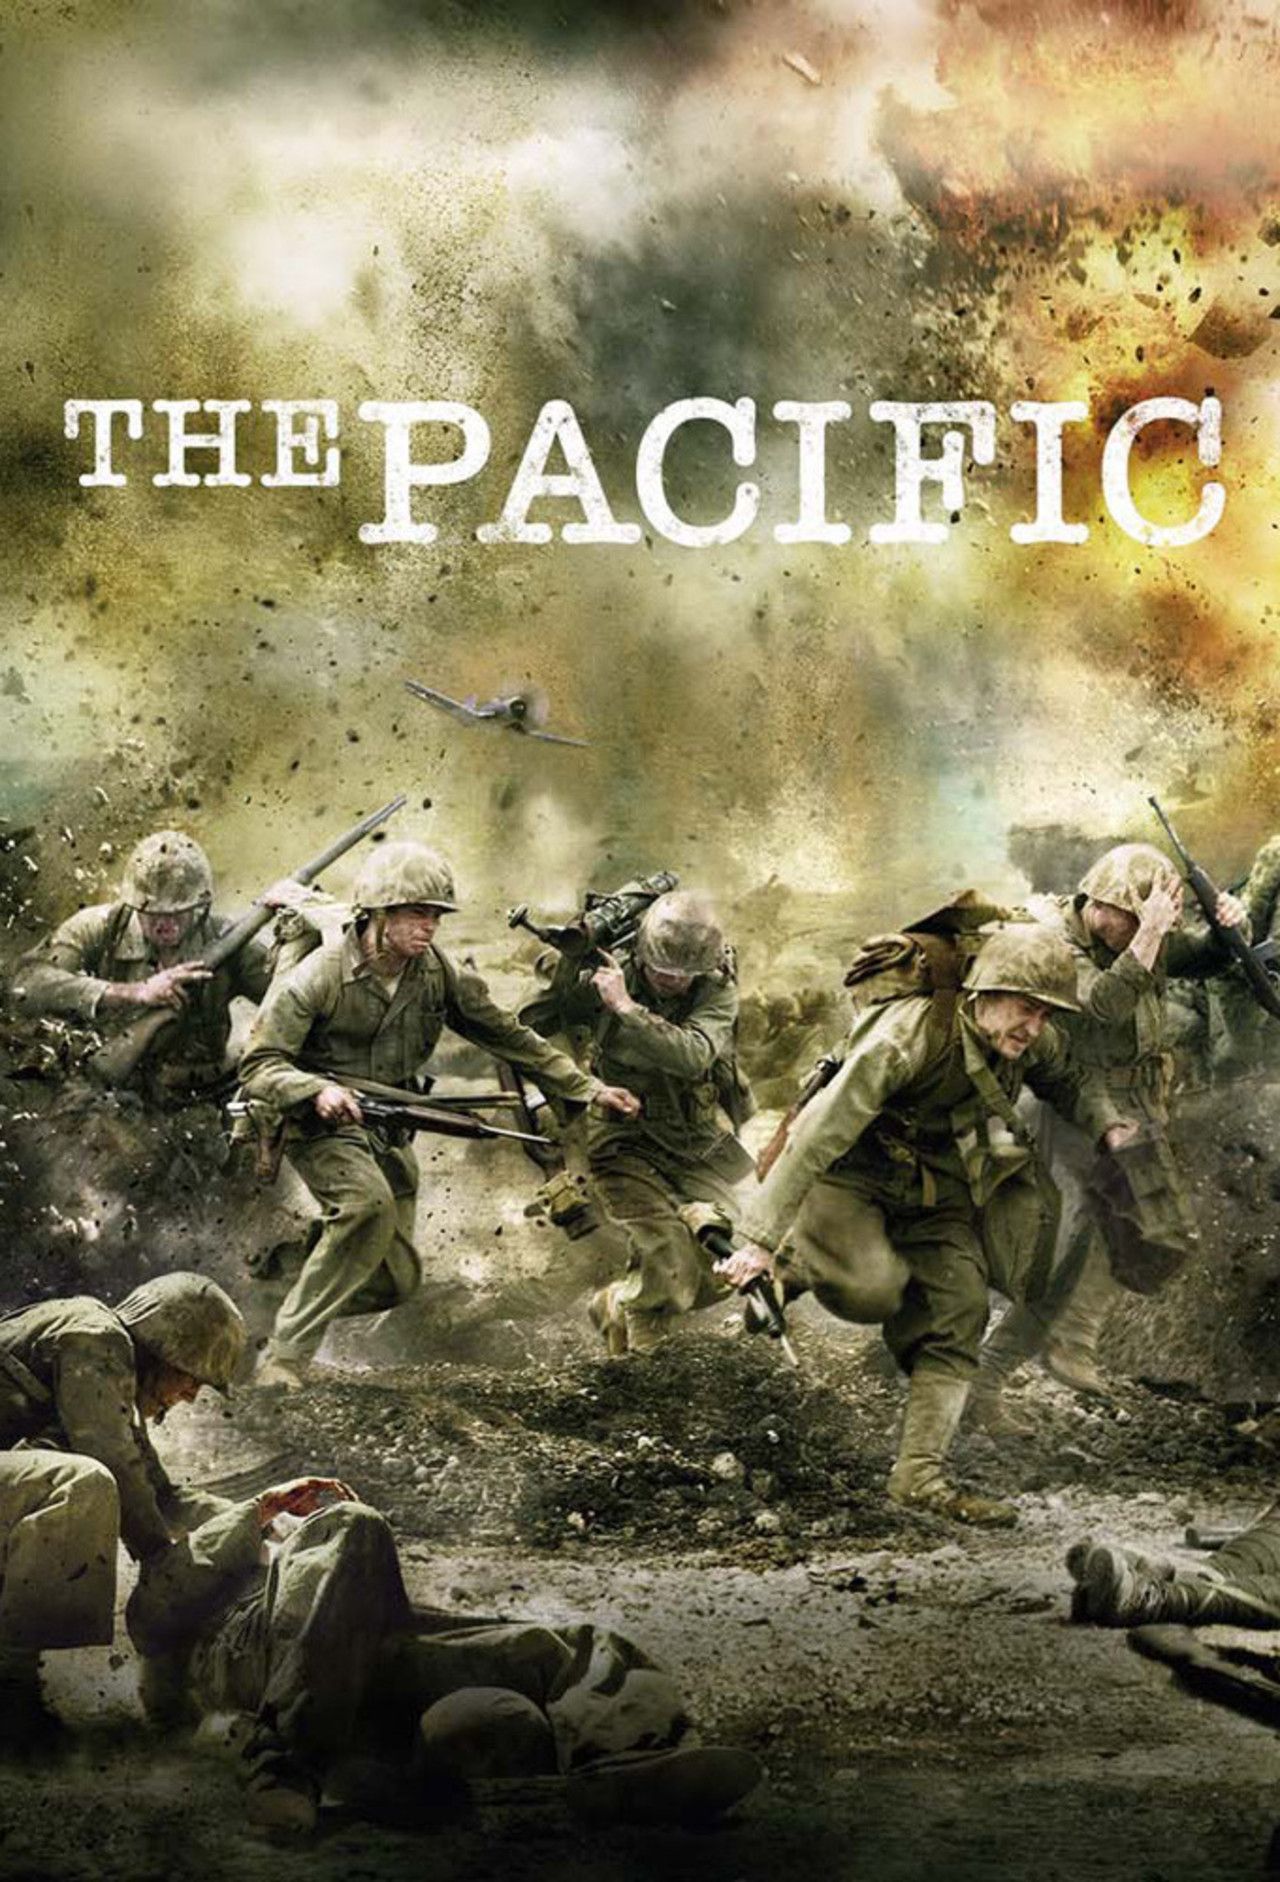 Poster for the television series “The Pacific”